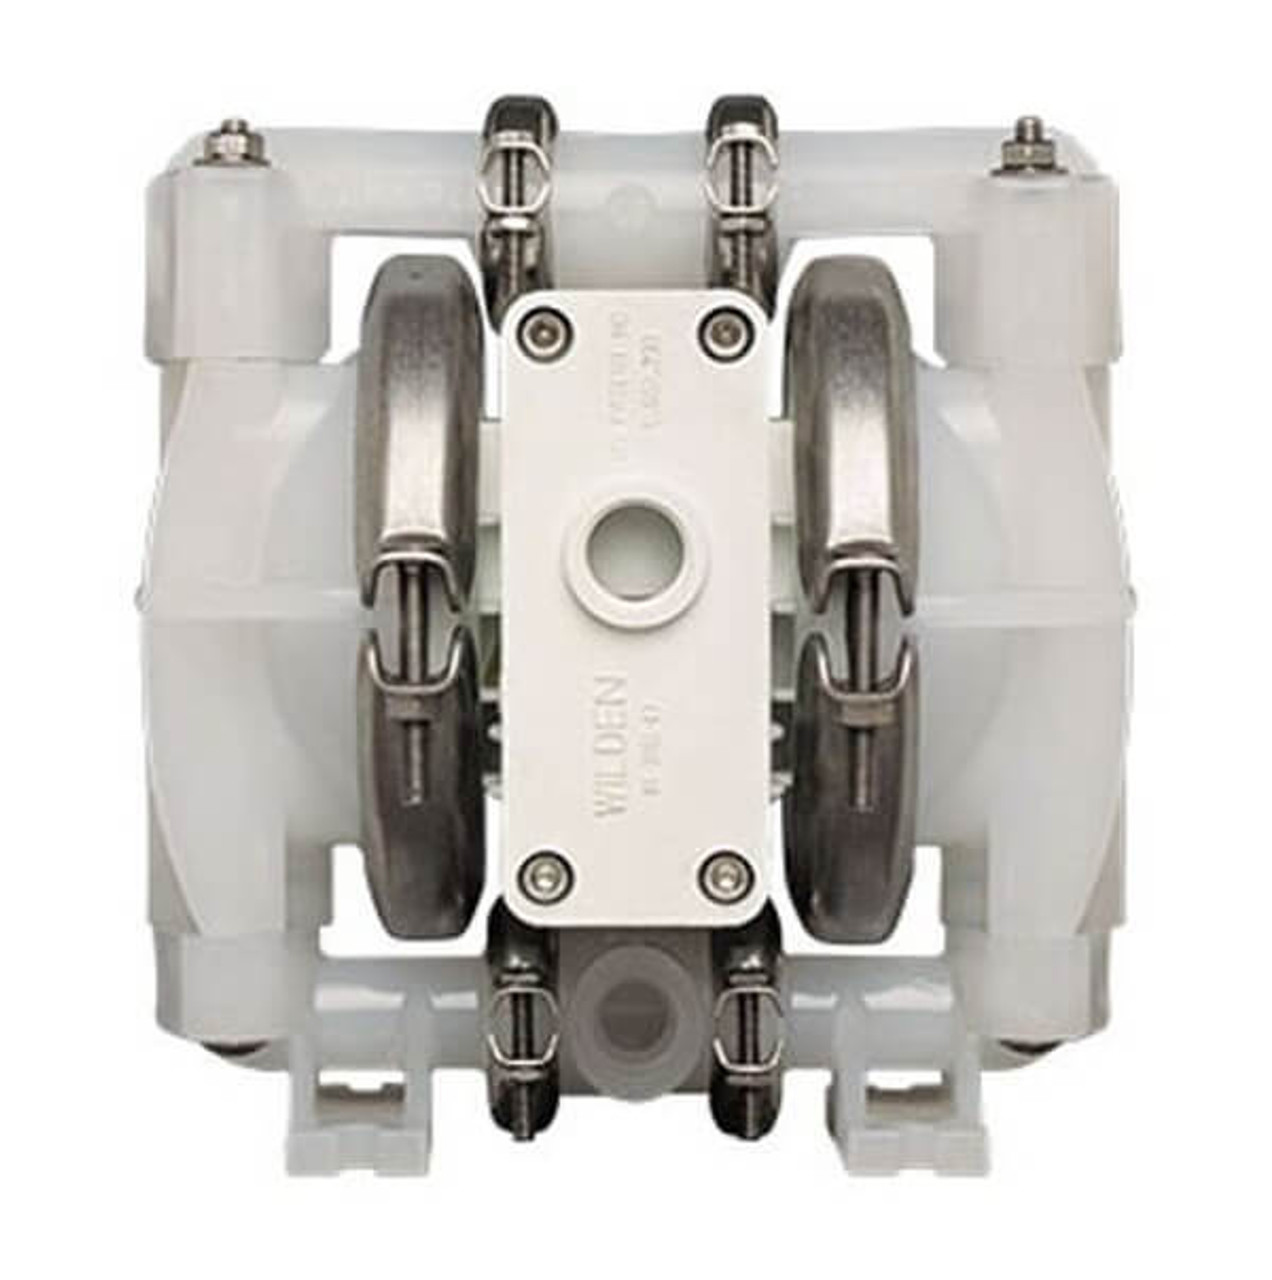 01-2686 1/2" Wilden Air Operated Double Diaphragm (AODD) Pump, P1/PPPPP/VTS/VT/VT